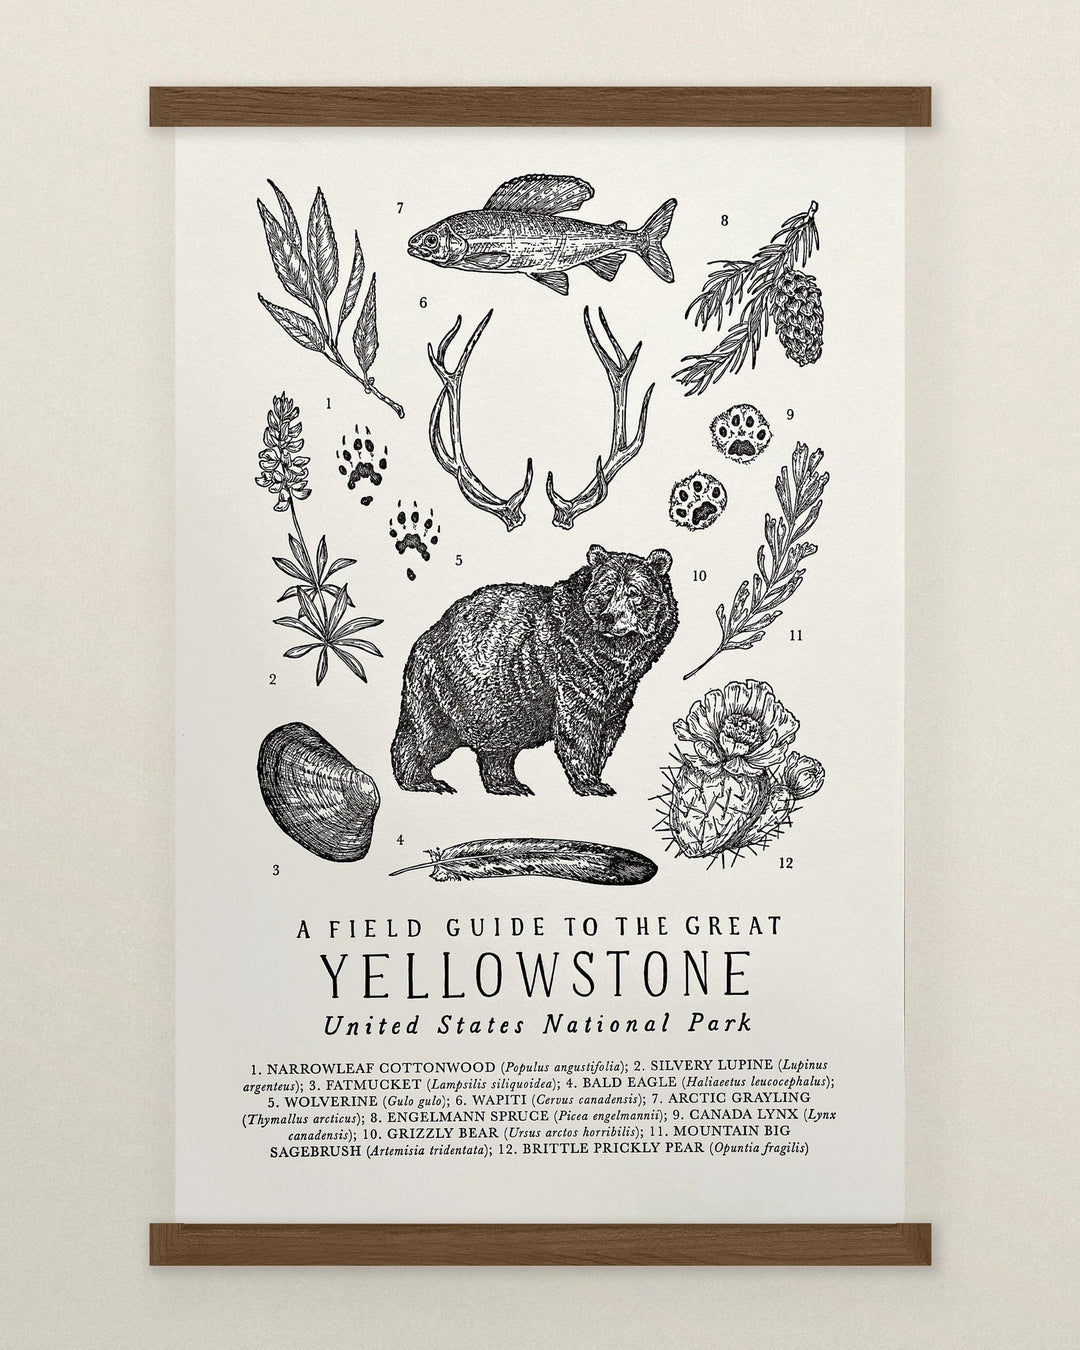 A Yellowstone National Park Field Guide Letterpress Print by The Wild Wander featuring animals and plants from the region.